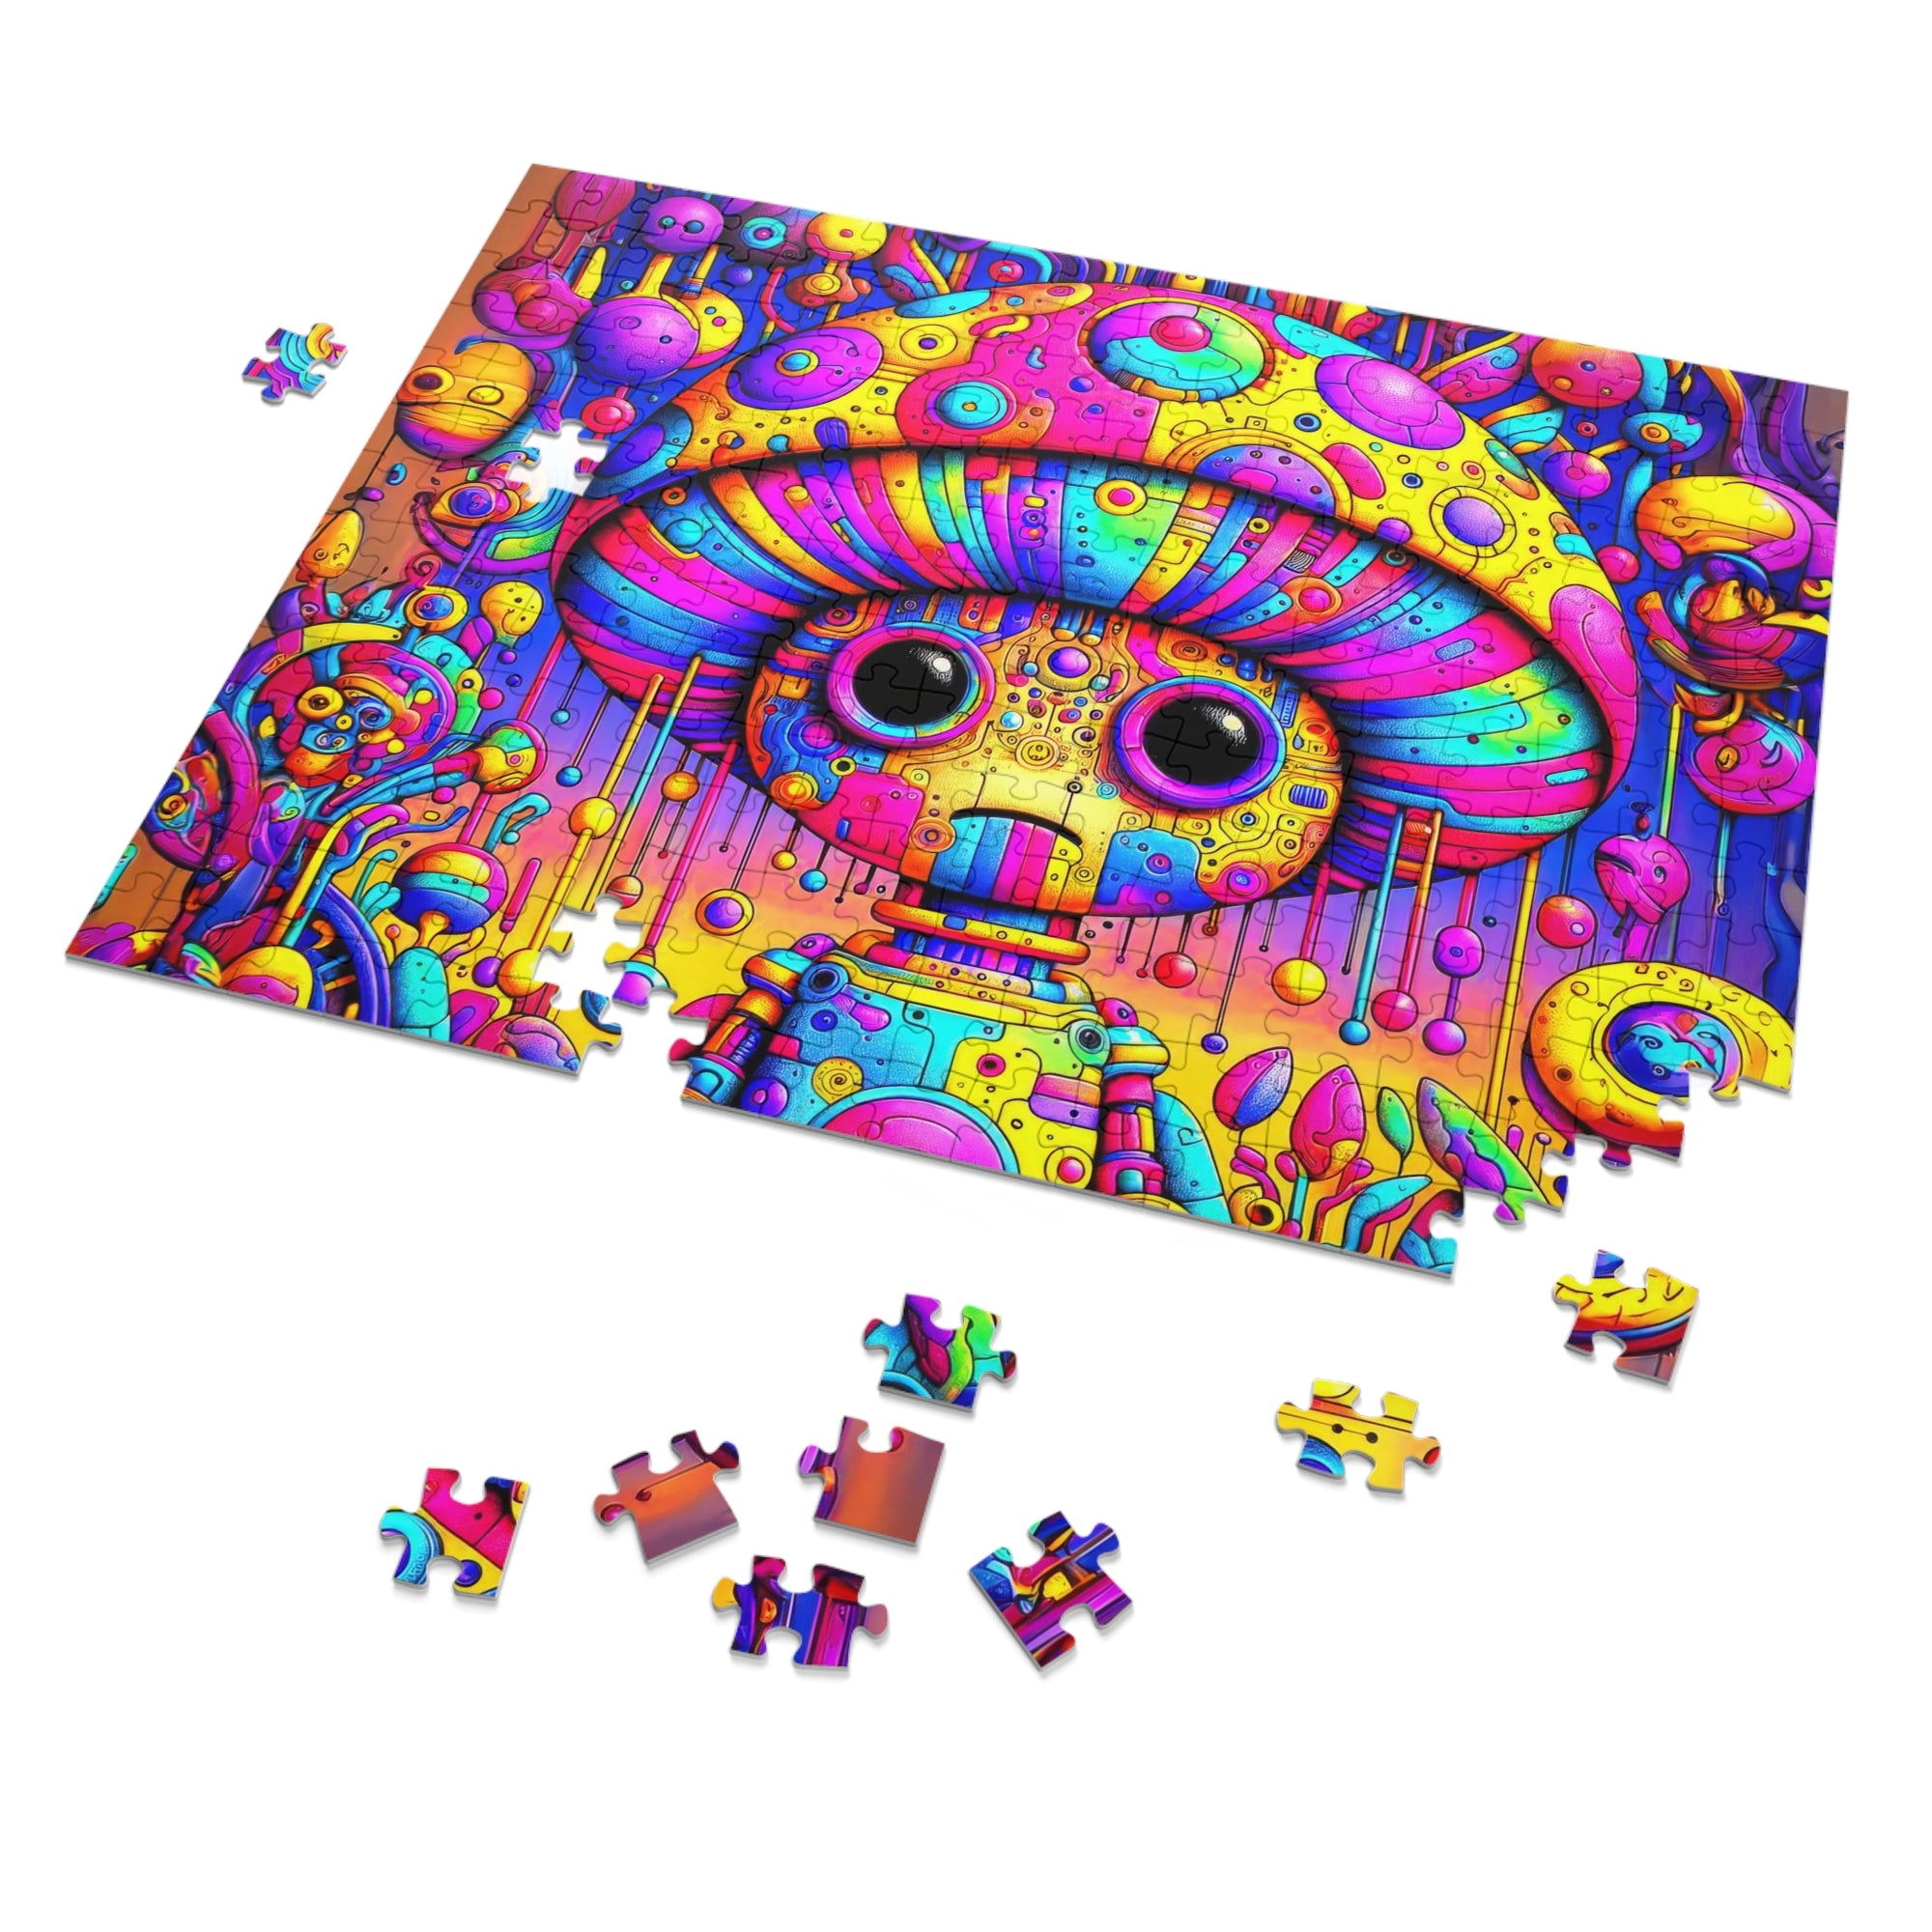 The Cosmic Marionette Puzzle